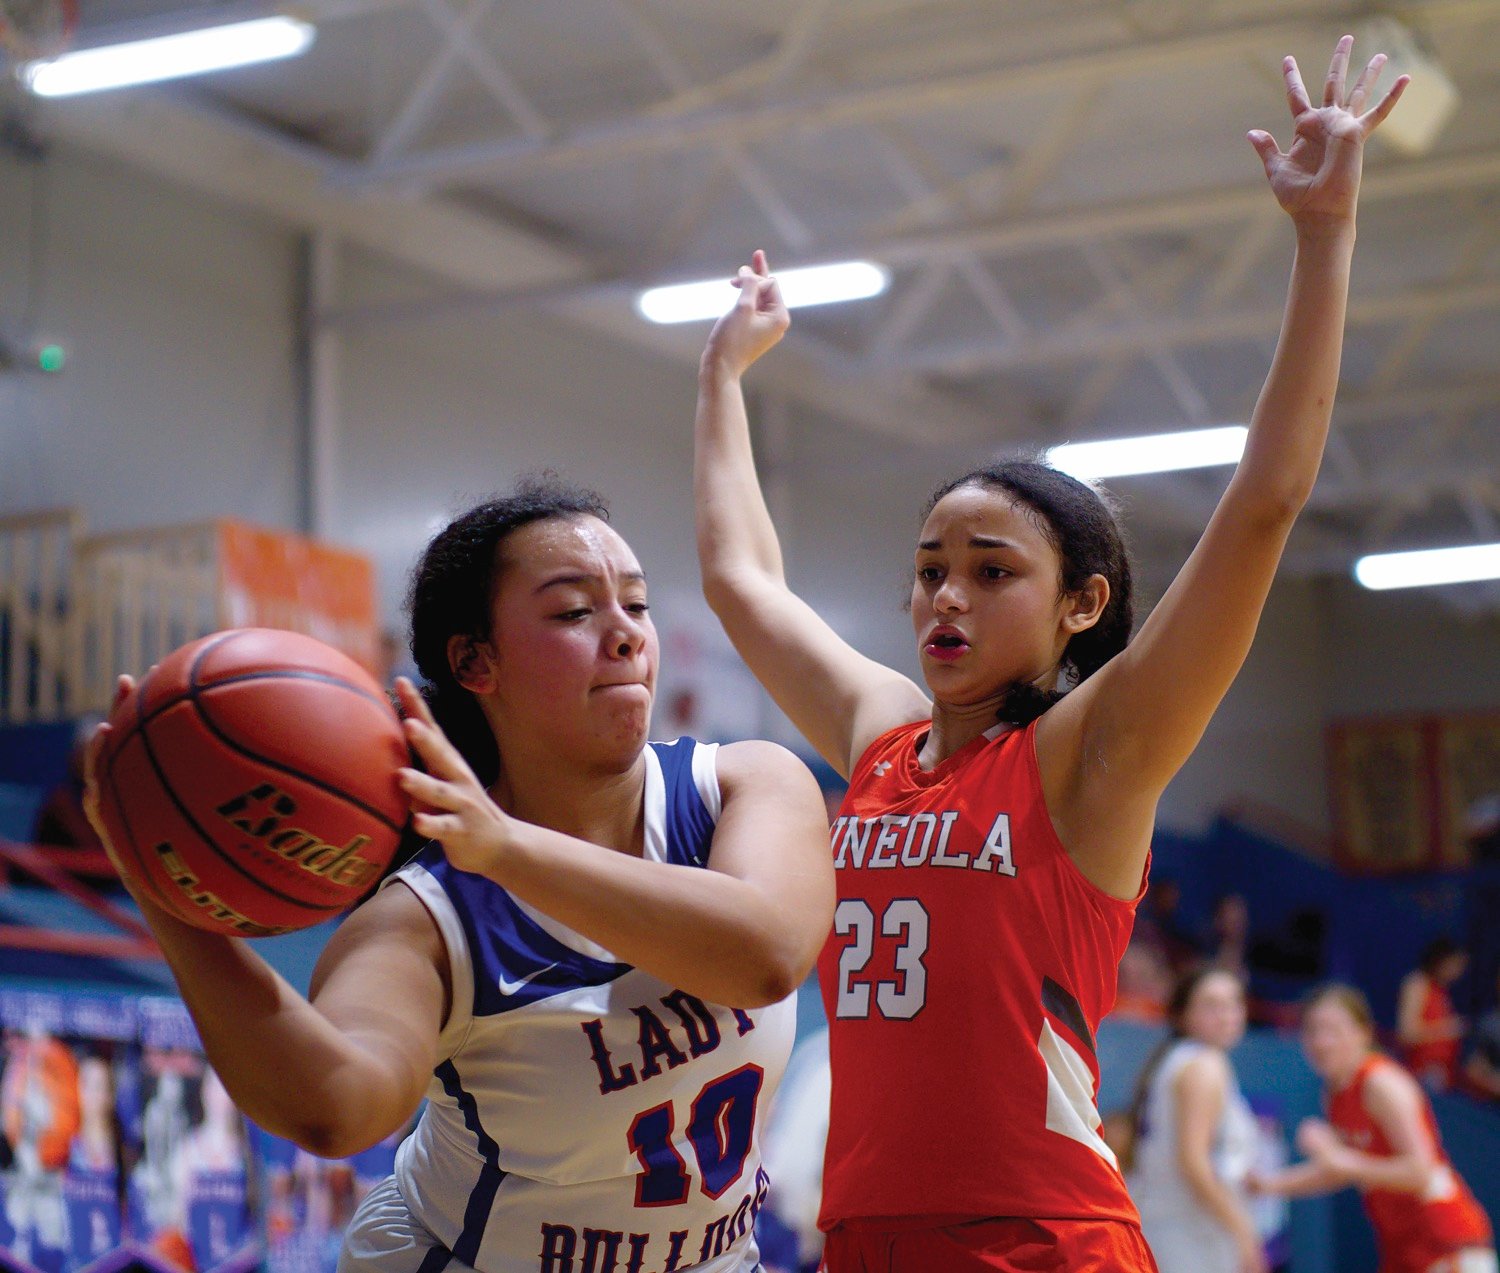 Kyra Jackson applies pressure to Ashley Davis as Mineola attempts to make a comeback in the fourth quarter. [see more shots, buy basketball photos]